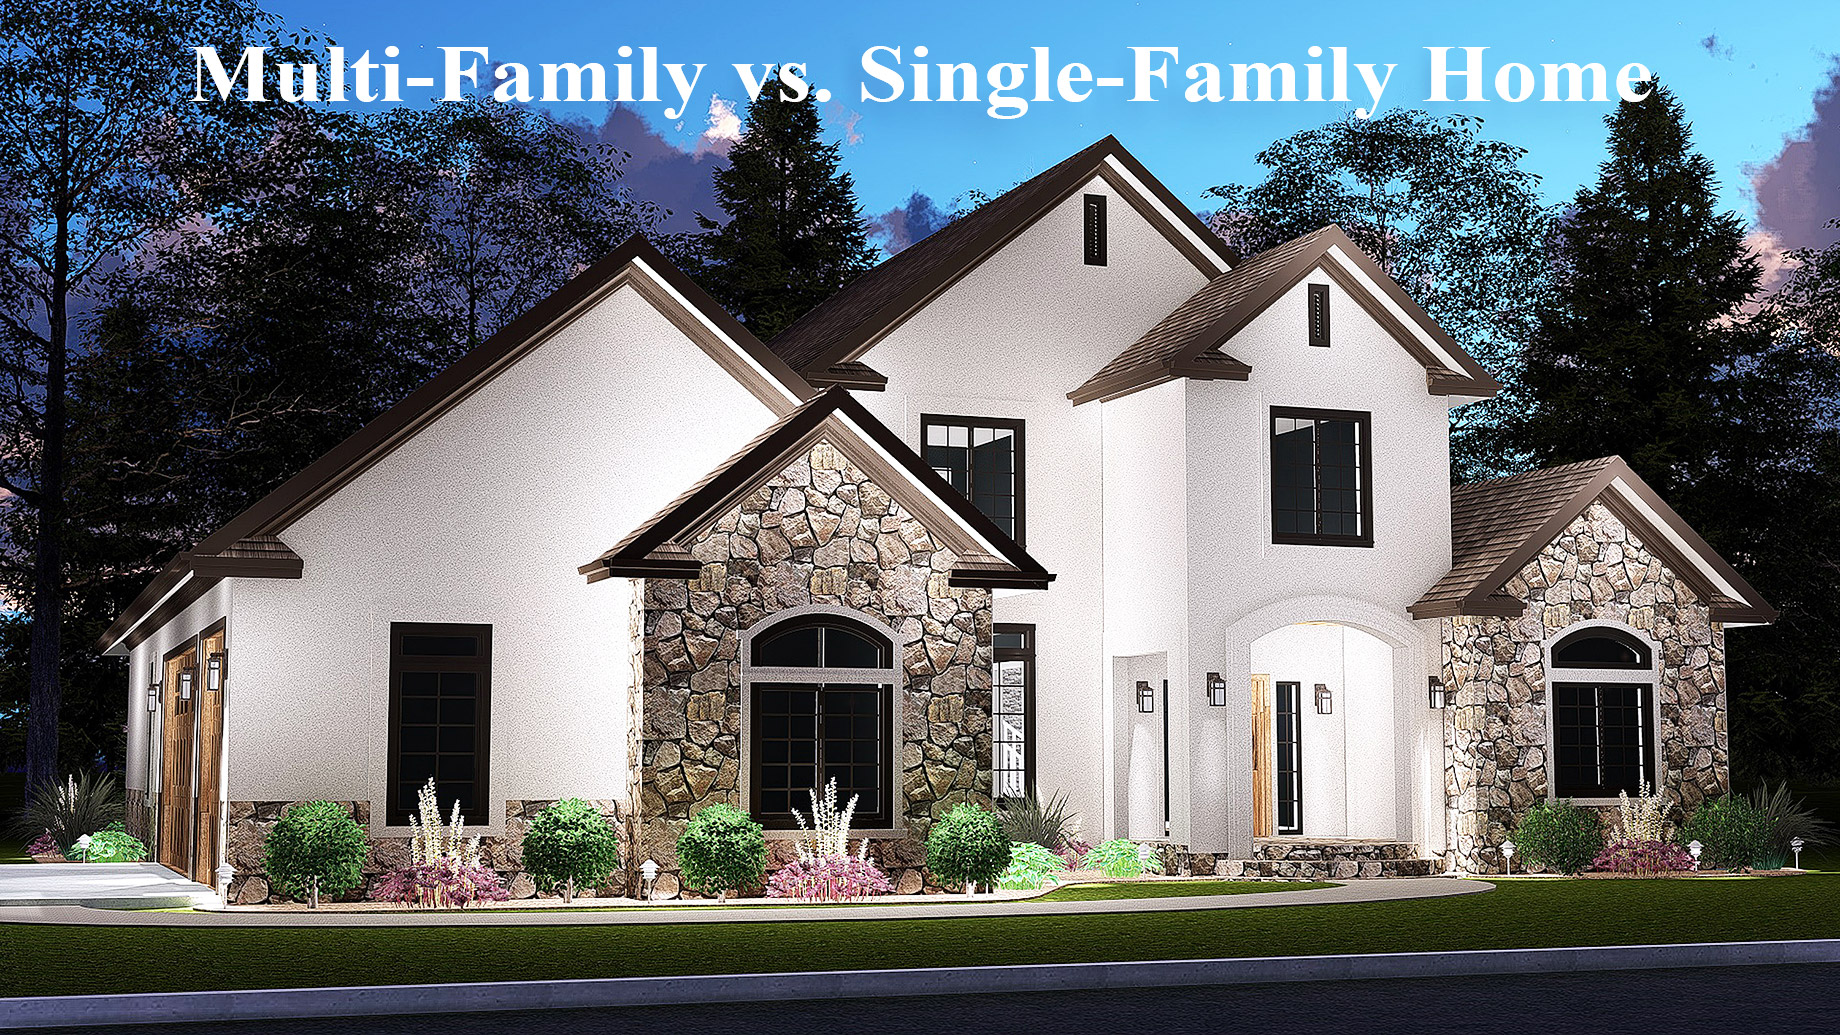 Multi-Family vs. Single-Family Home - Where To Invest This Year?